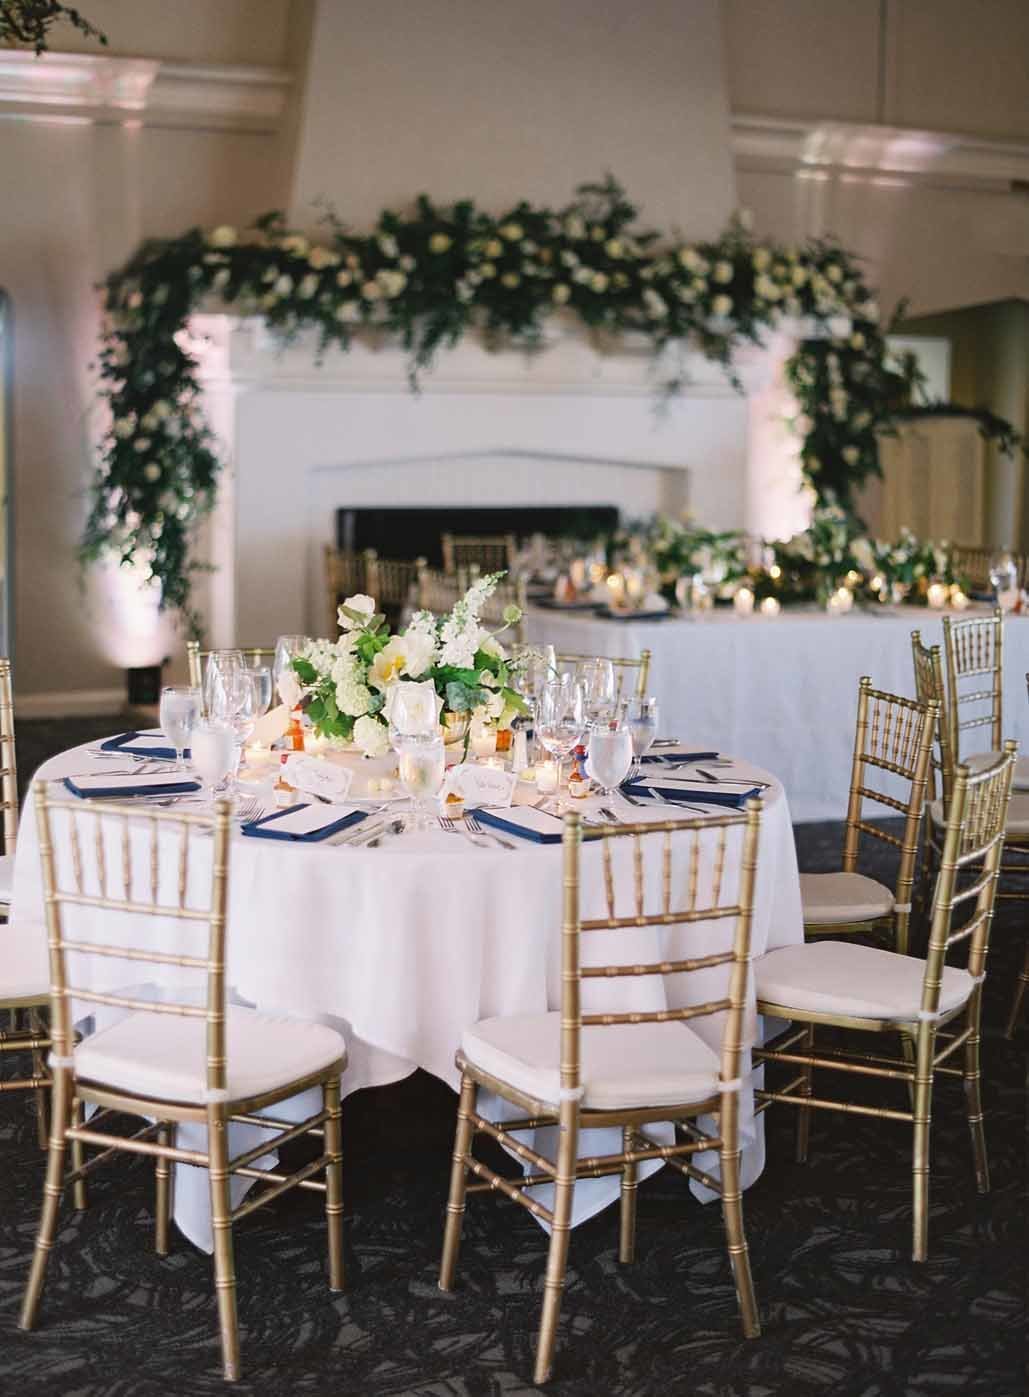 guest tables at Seattle Country Club wedding reception with ivory linens, blue napkins, gold Chivari chairs and greenery garland around fireplace behind head table